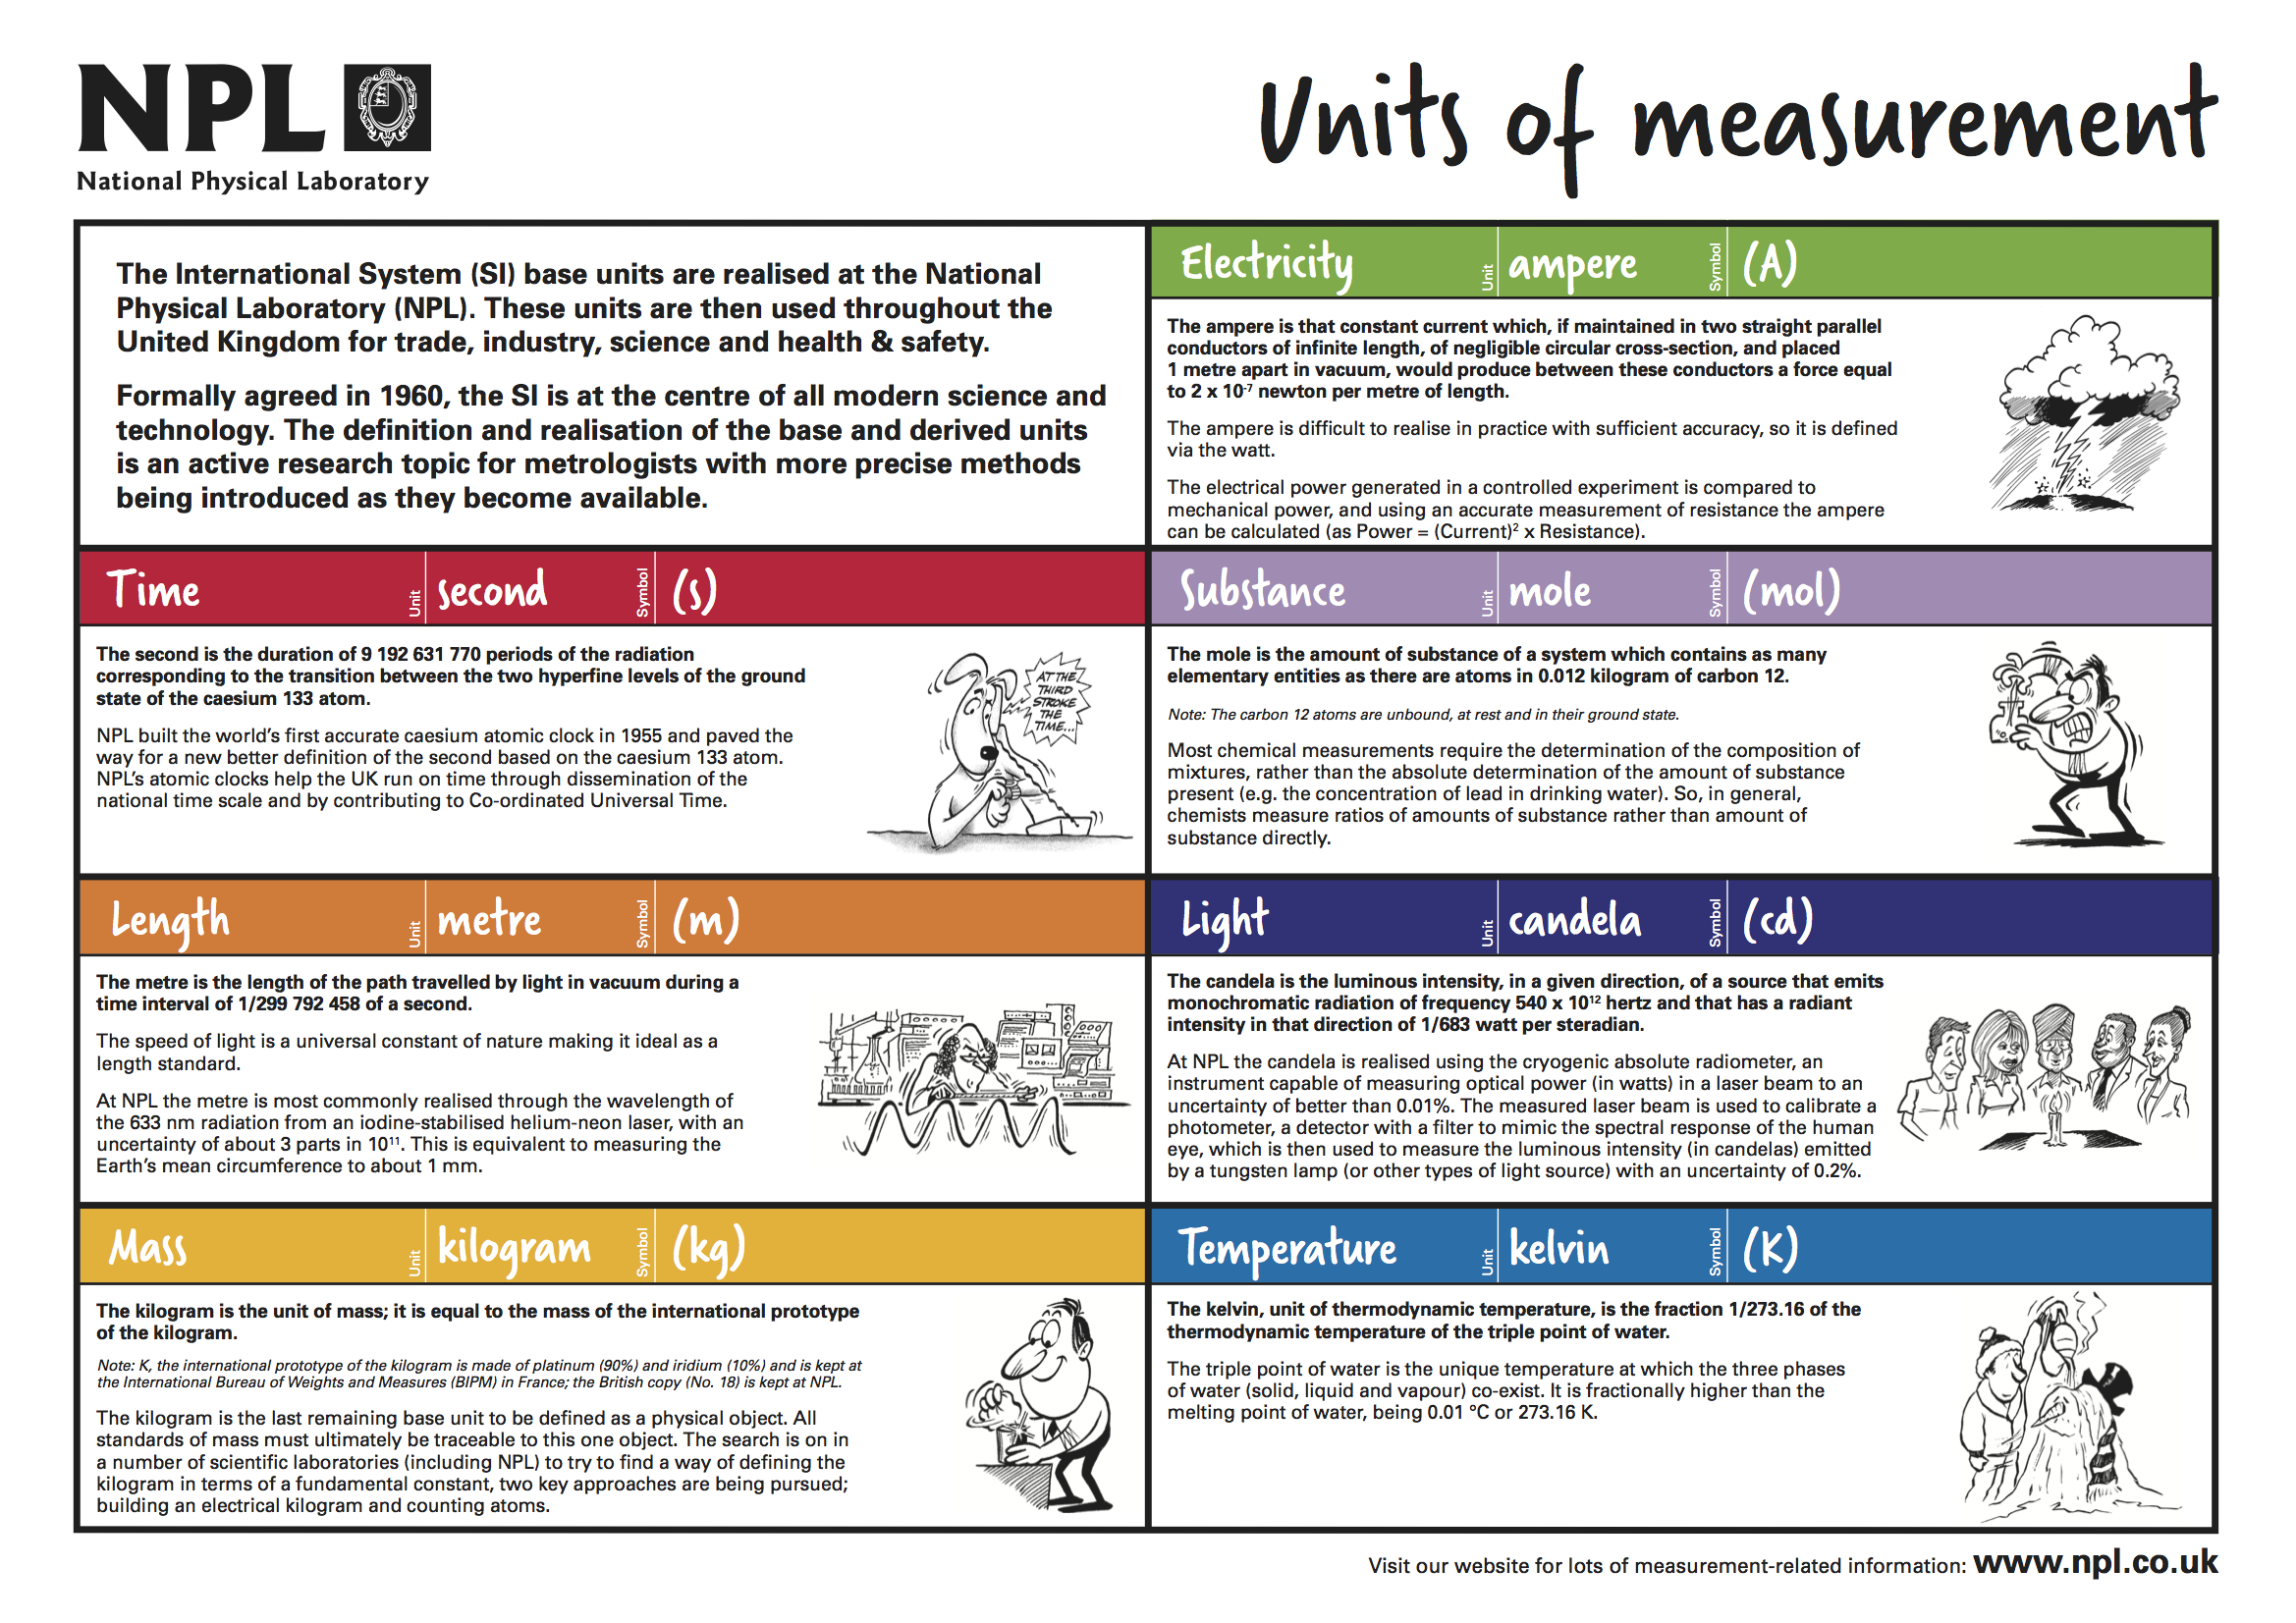 Units of measurement in the SI metric system